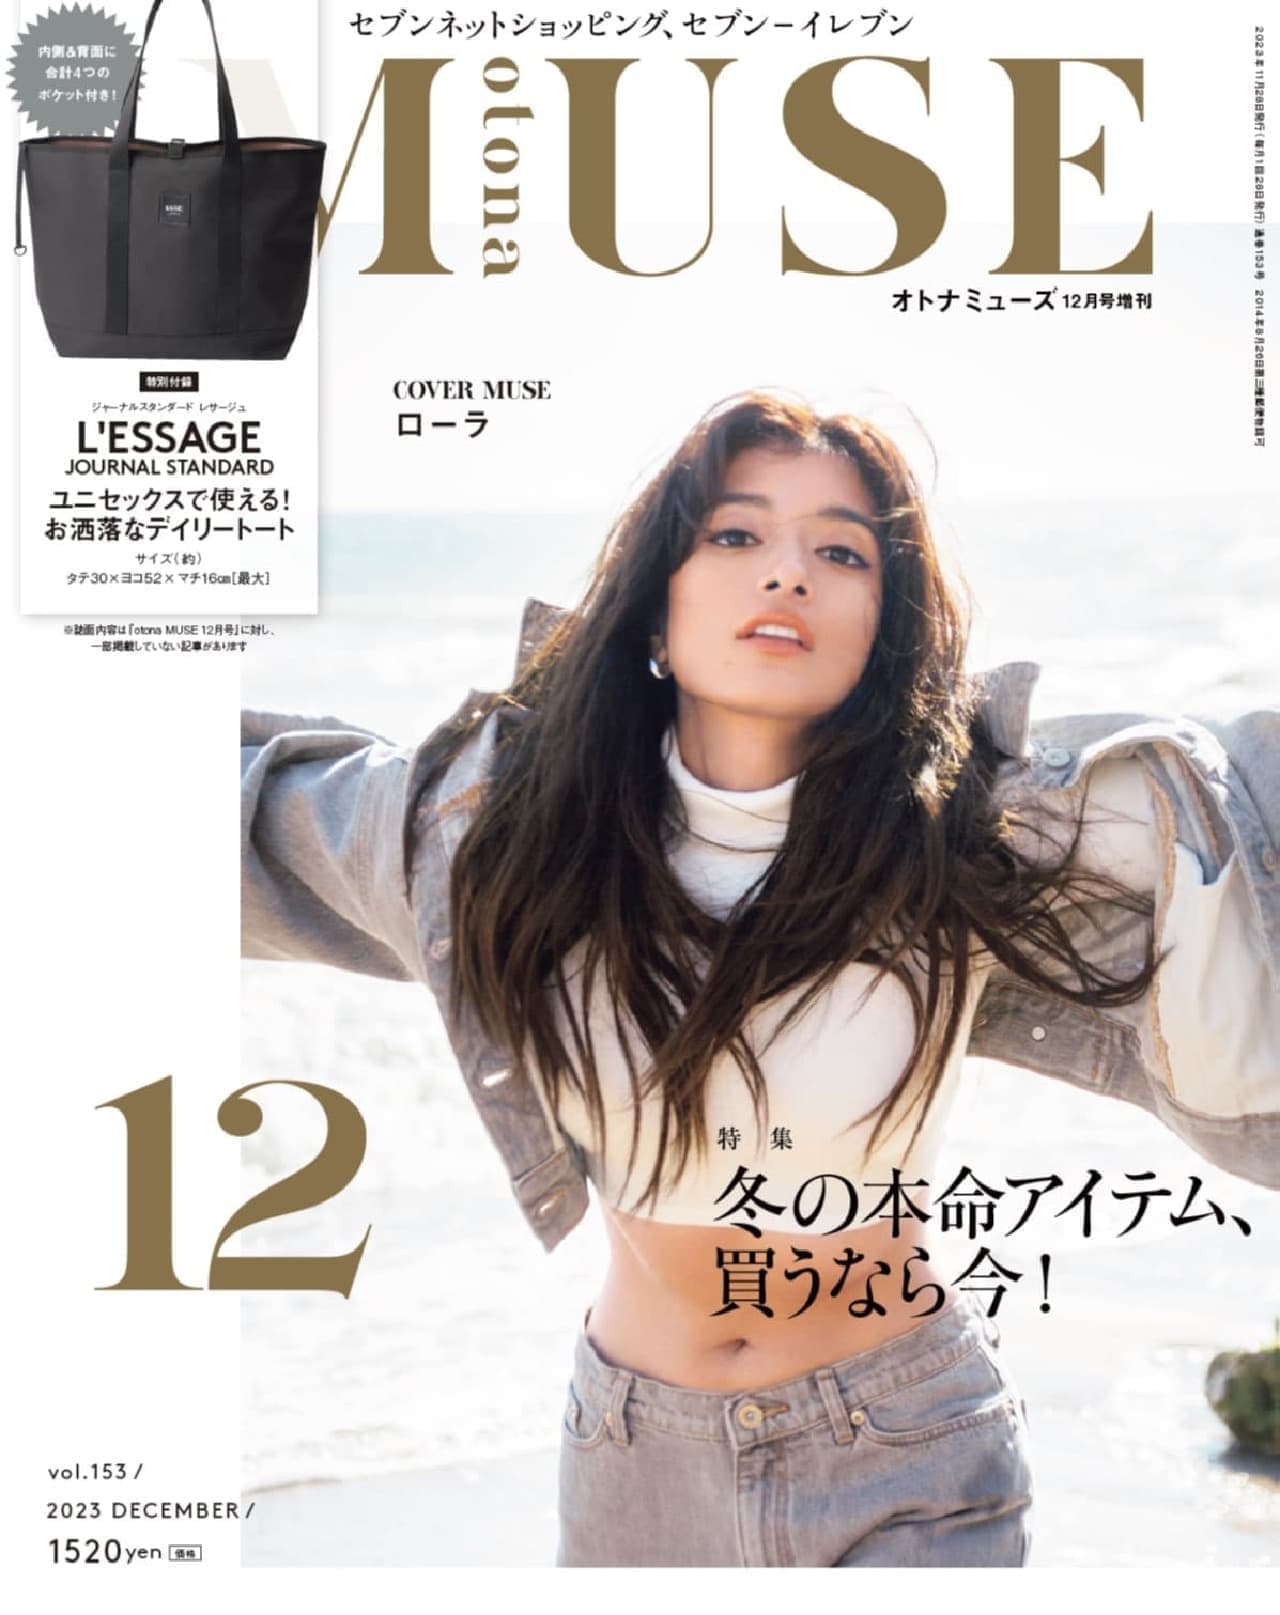 Otona Muse" December extra issue with a tote bag as an accessory.